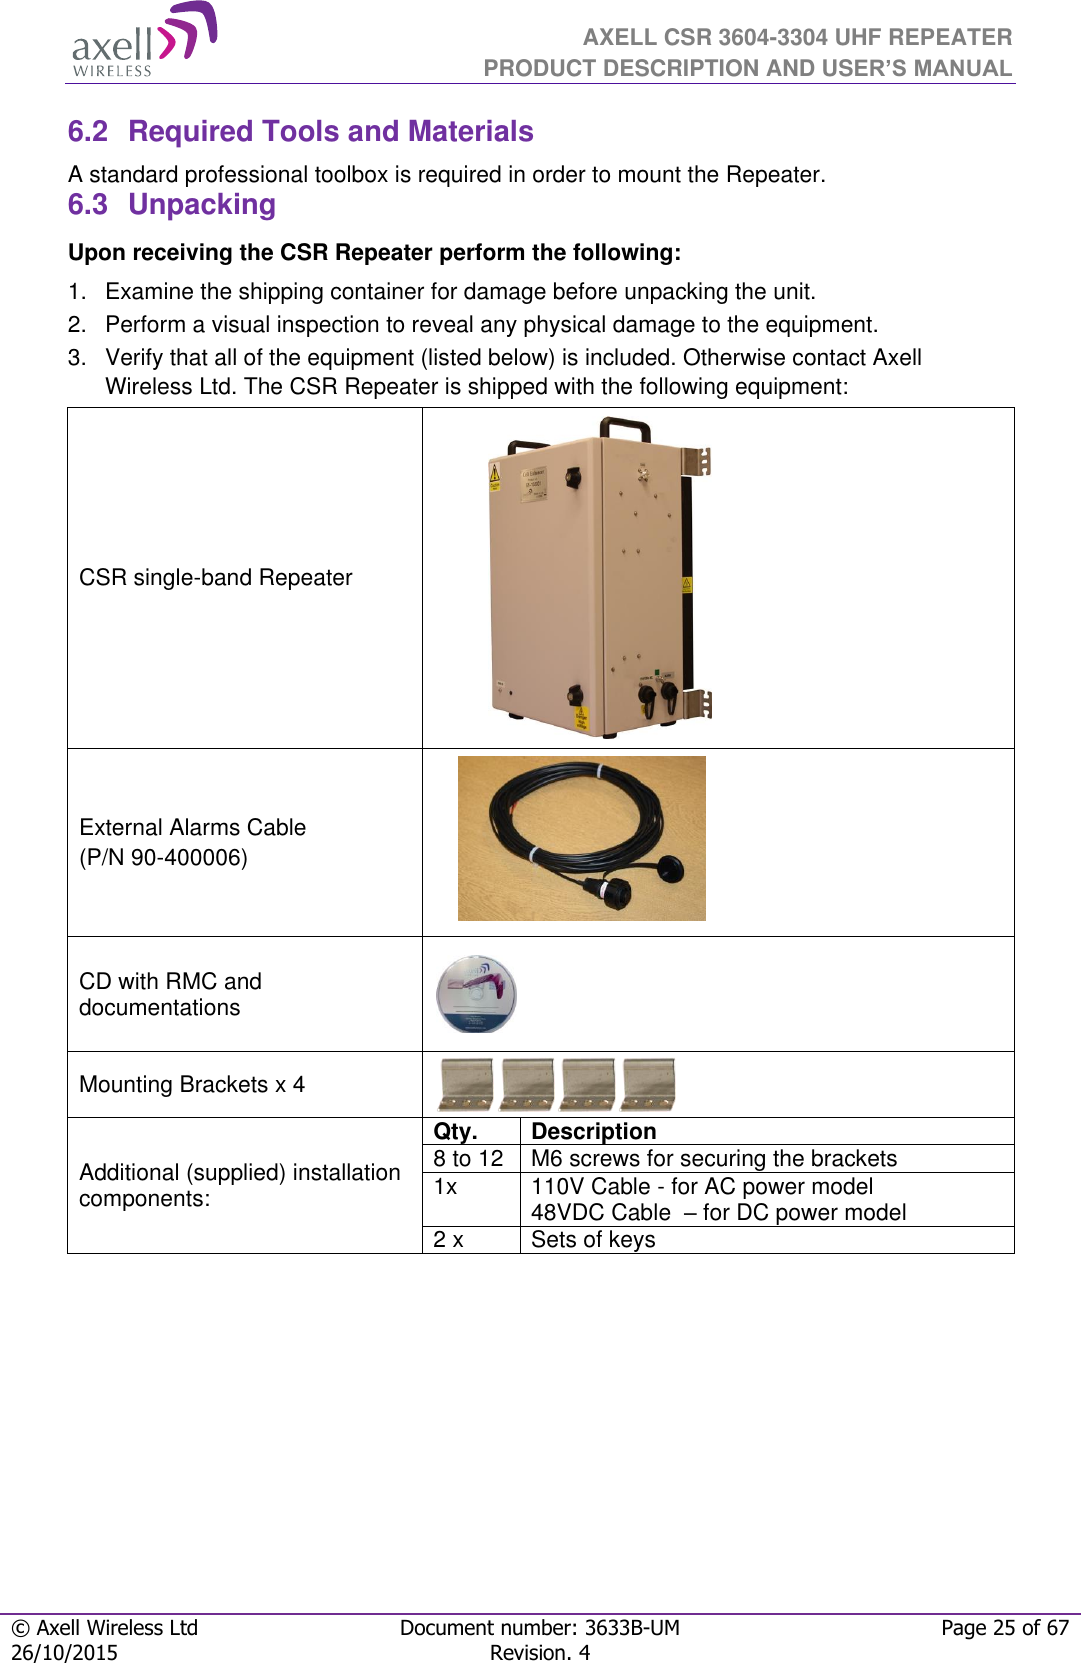  AXELL CSR 3604-3304 UHF REPEATER PRODUCT DESCRIPTION AND USER’S MANUAL  © Axell Wireless Ltd Document number: 3633B-UM Page 25 of 67 26/10/2015 Revision. 4   6.2  Required Tools and Materials A standard professional toolbox is required in order to mount the Repeater. 6.3  Unpacking Upon receiving the CSR Repeater perform the following:  1.  Examine the shipping container for damage before unpacking the unit. 2.  Perform a visual inspection to reveal any physical damage to the equipment.  3.  Verify that all of the equipment (listed below) is included. Otherwise contact Axell Wireless Ltd. The CSR Repeater is shipped with the following equipment:  CSR single-band Repeater            External Alarms Cable (P/N 90-400006)       CD with RMC and documentations  Mounting Brackets x 4  Additional (supplied) installation components: Qty.  Description  8 to 12  M6 screws for securing the brackets 1x  110V Cable - for AC power model 48VDC Cable  – for DC power model 2 x Sets of keys      